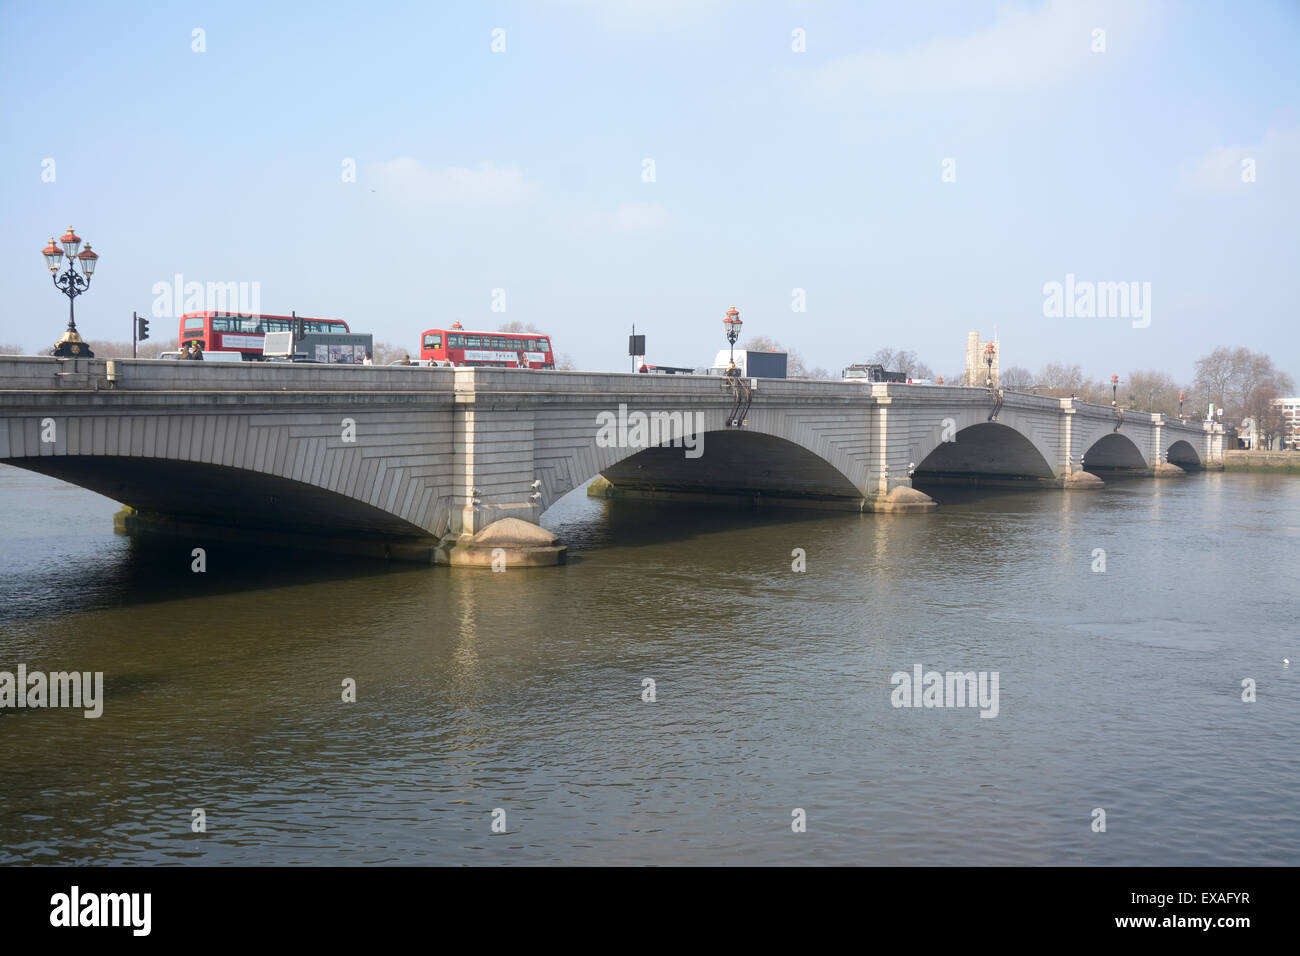 Busses and cars cross Putney Bridge the south bank of the River Thames Stock Photo